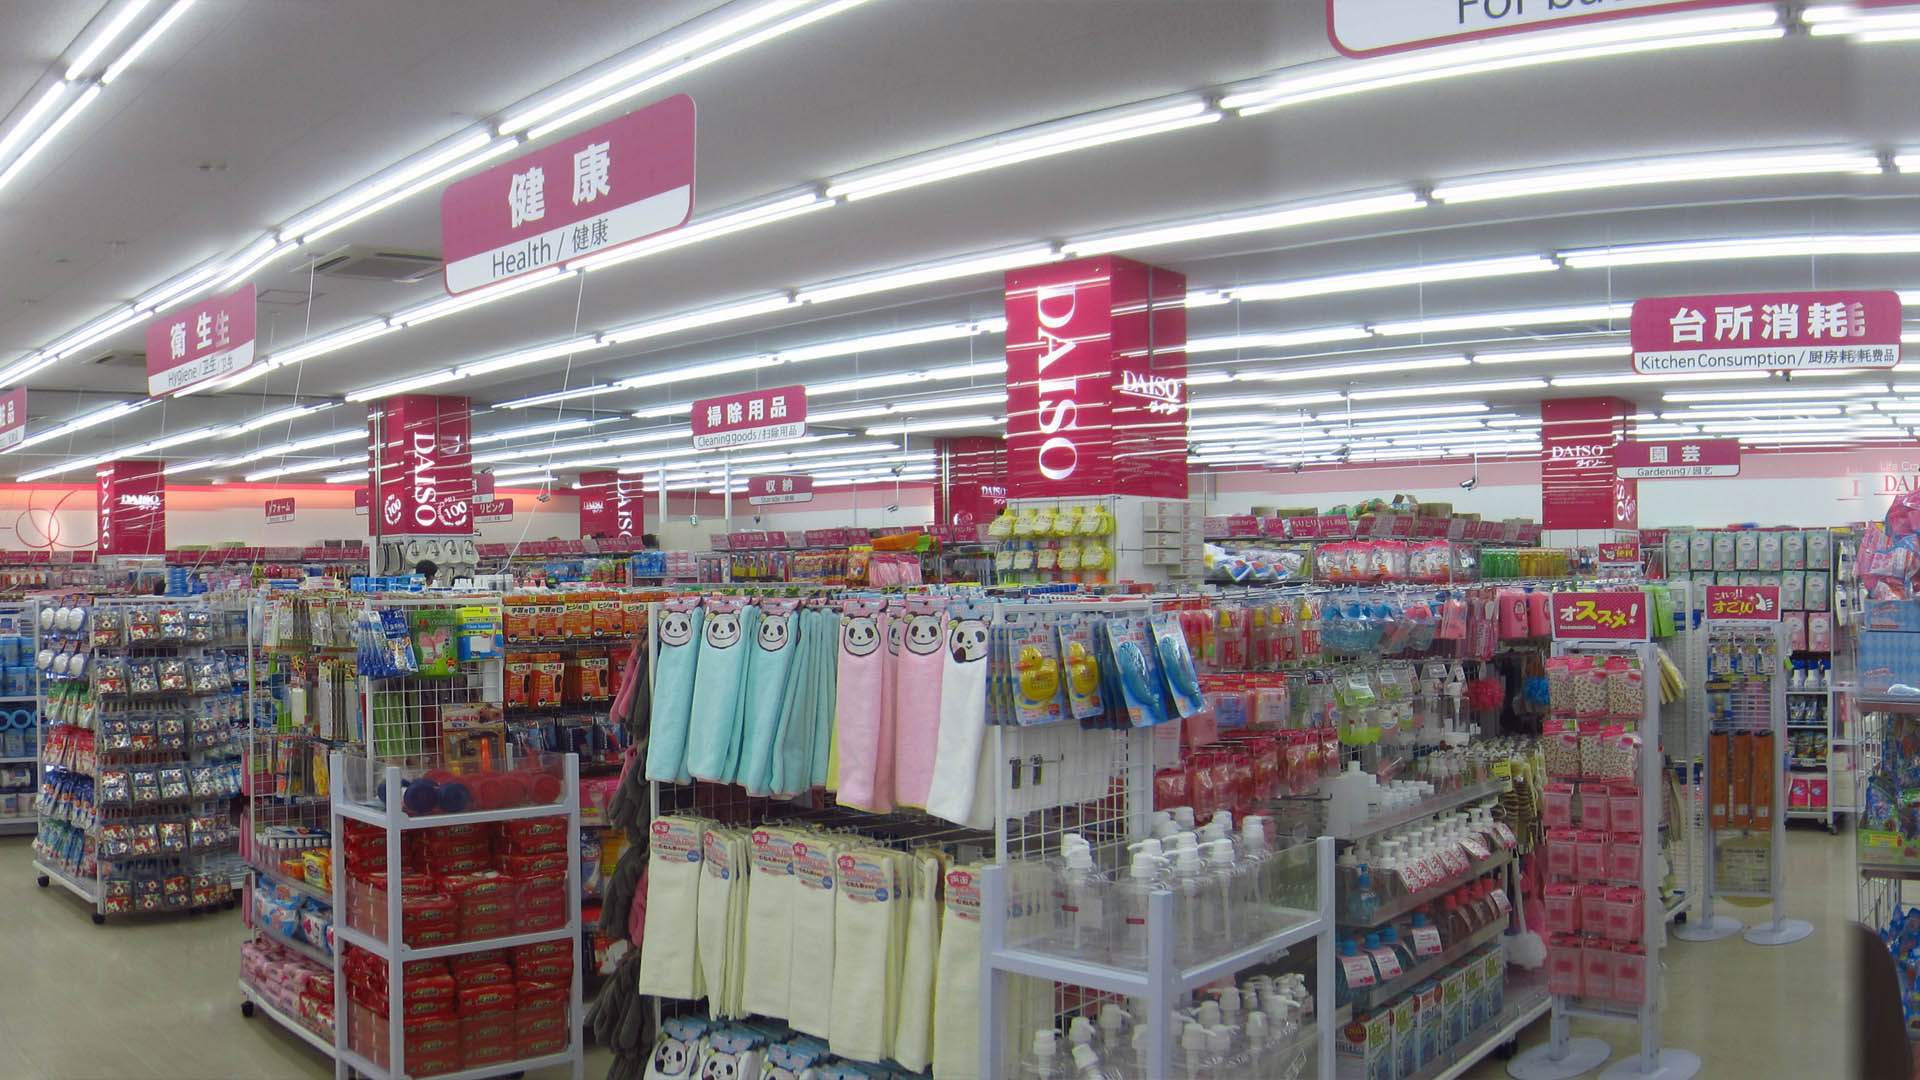 Daiso products in 7-eleven